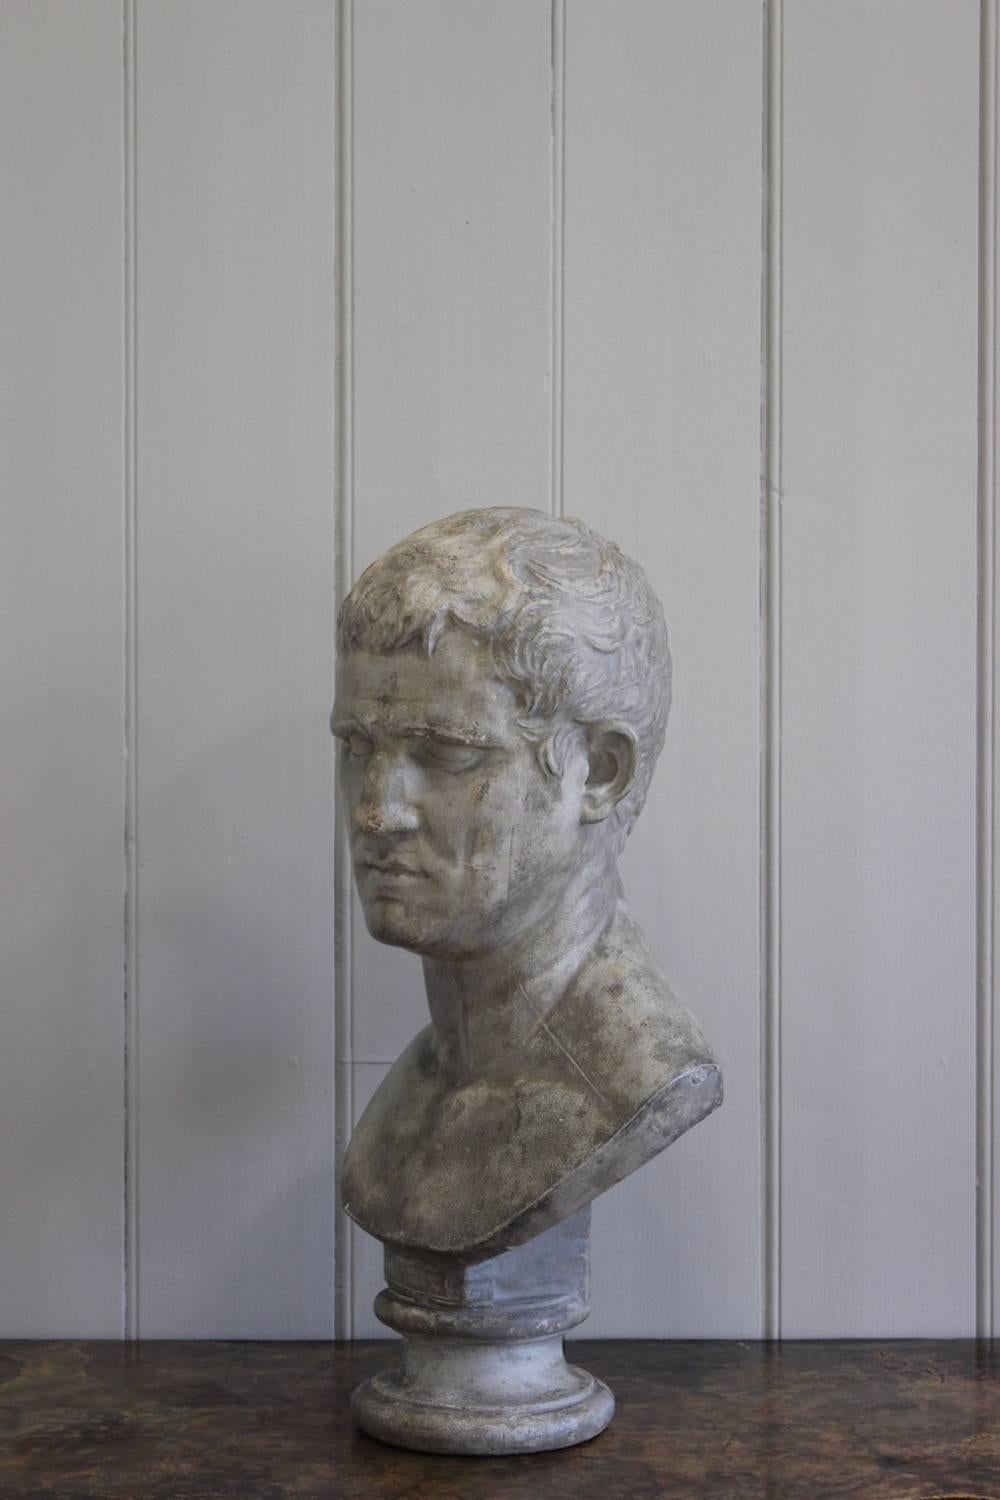 An antique grey-painted plaster bust of the Roman emperor Marcus Agrippa, French or Italian, 19th century.